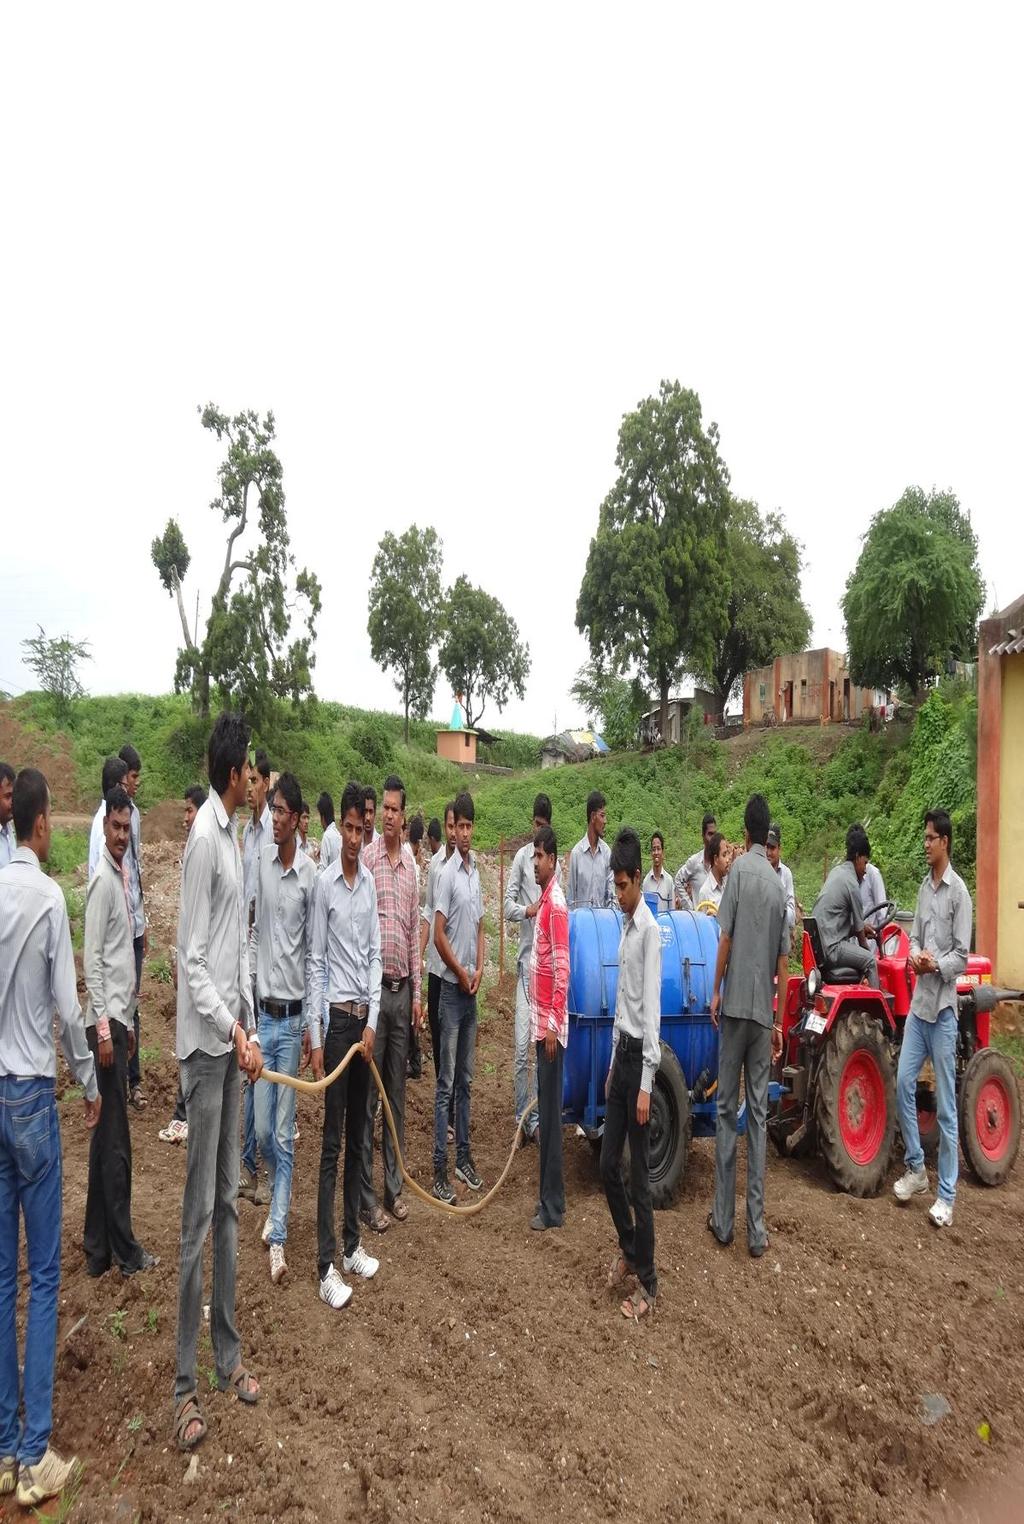 A moment when students watering